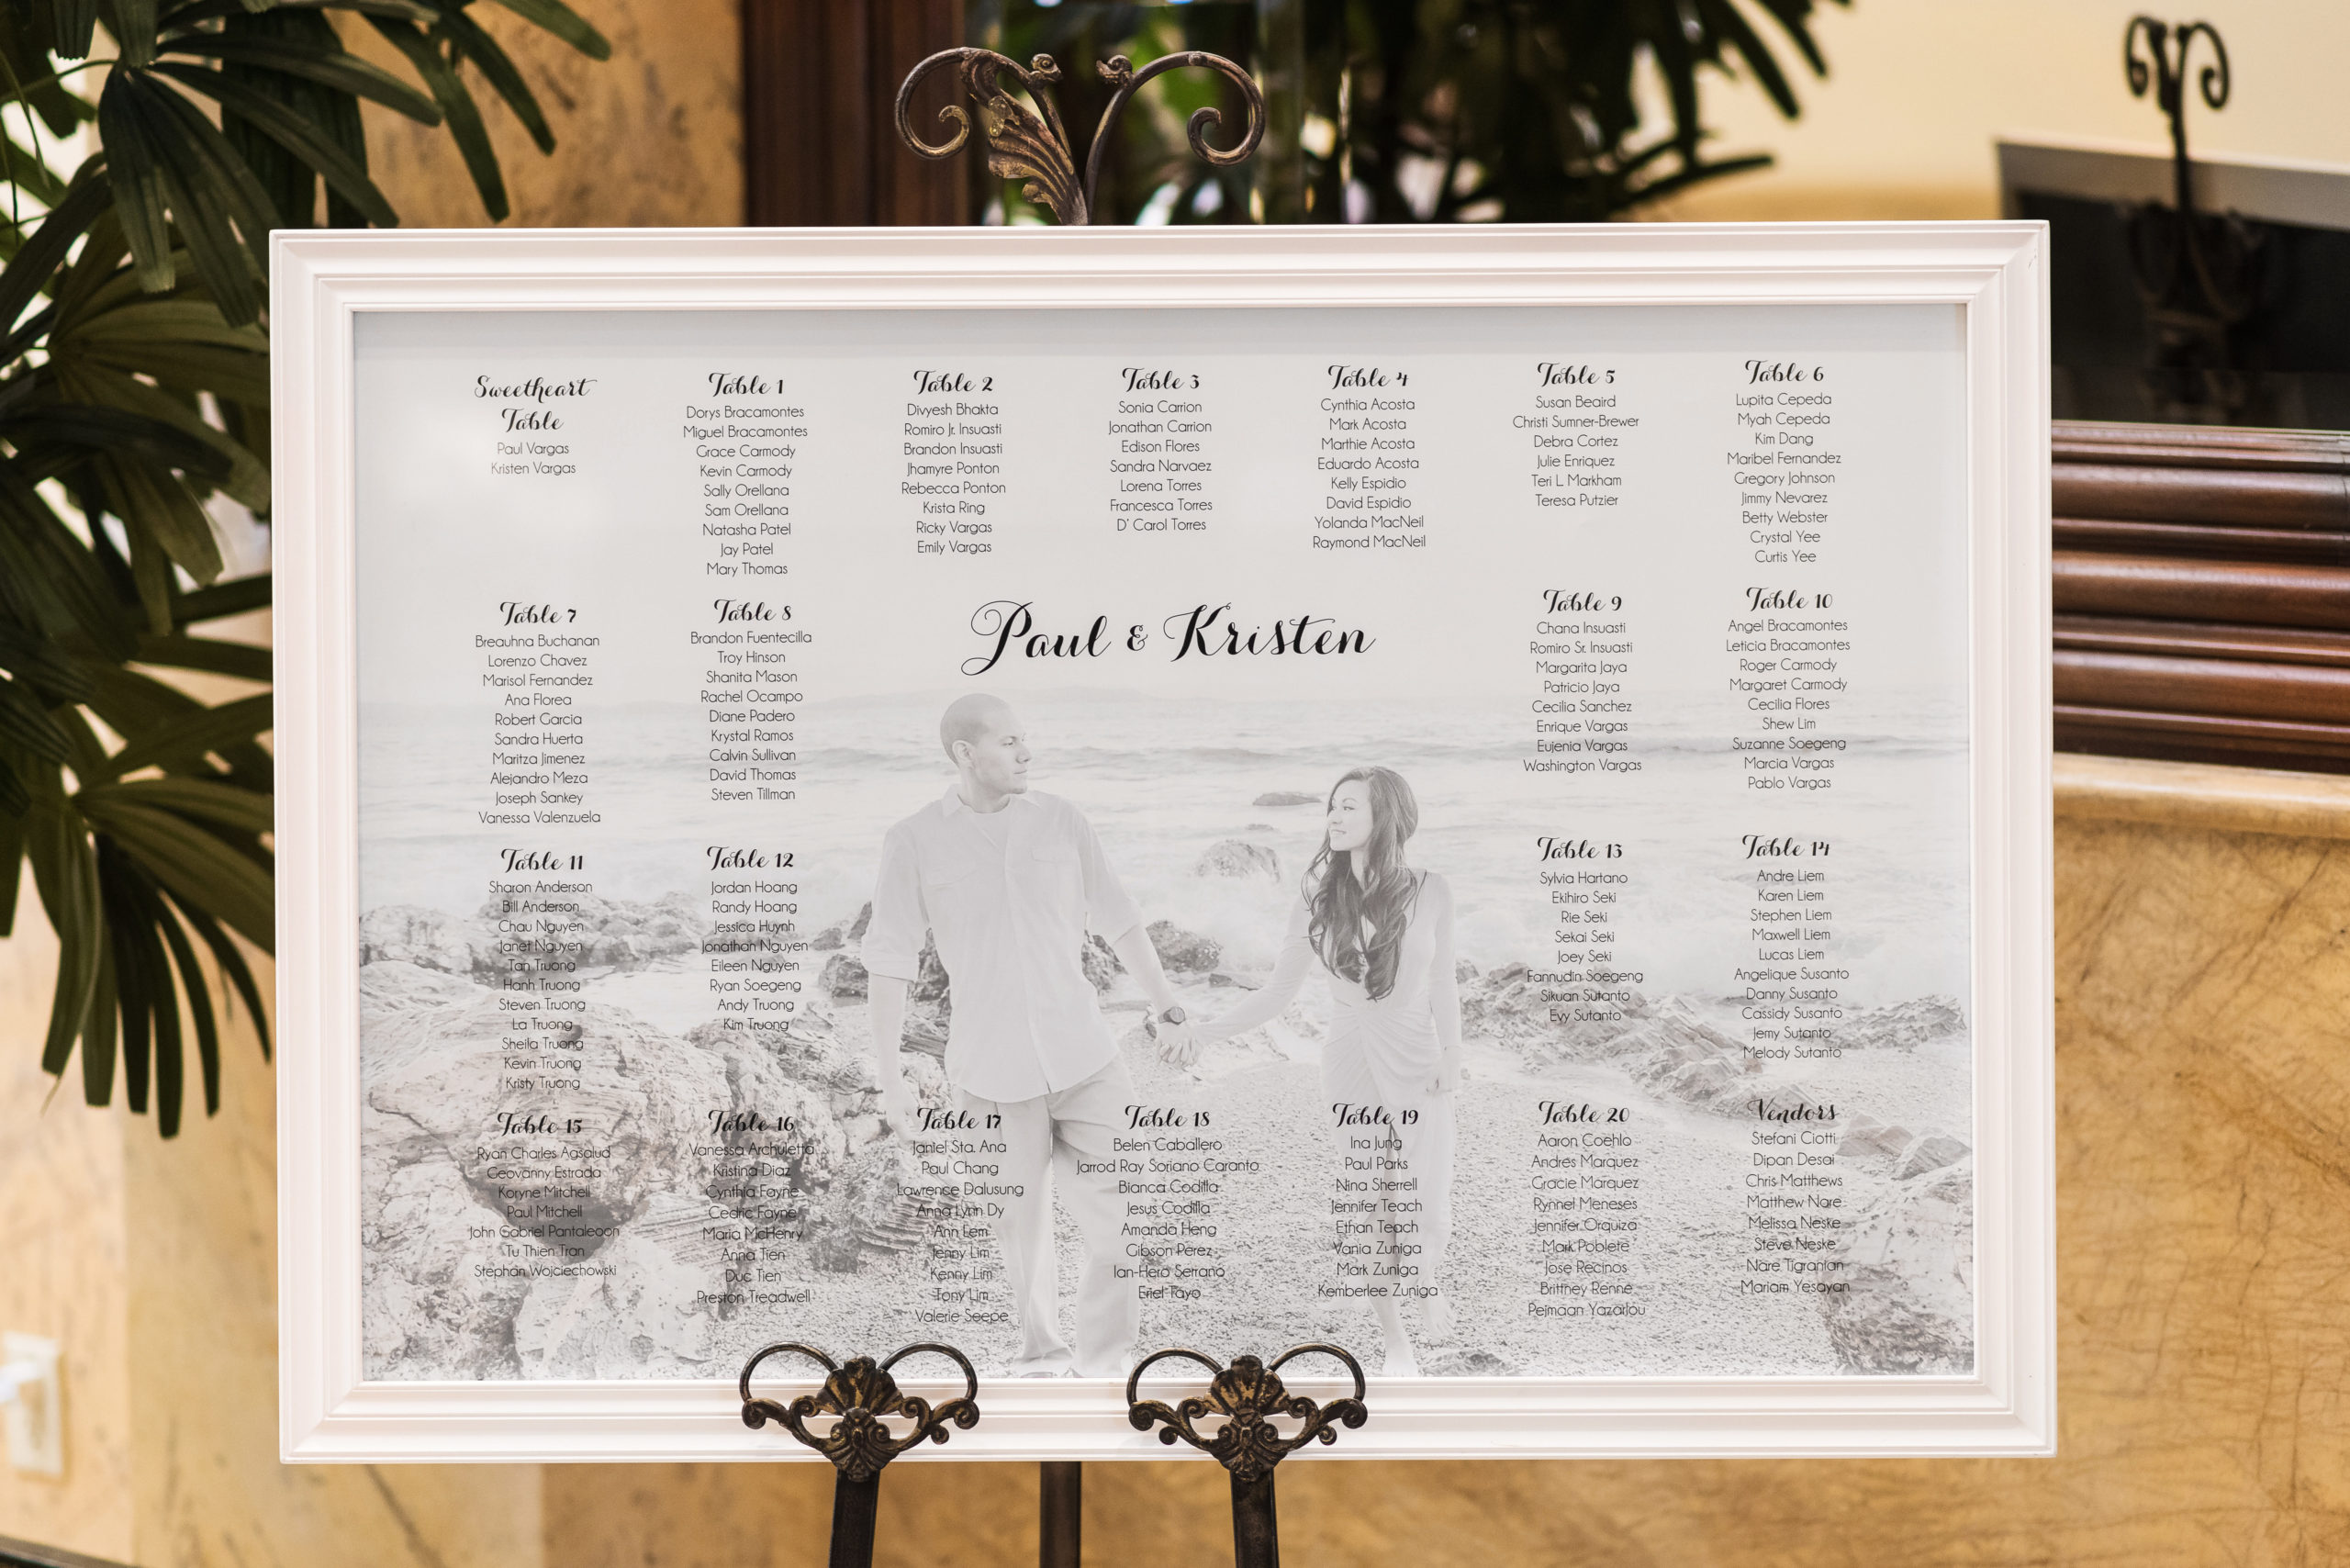 Use your engagement images as backdrop for your seating chart